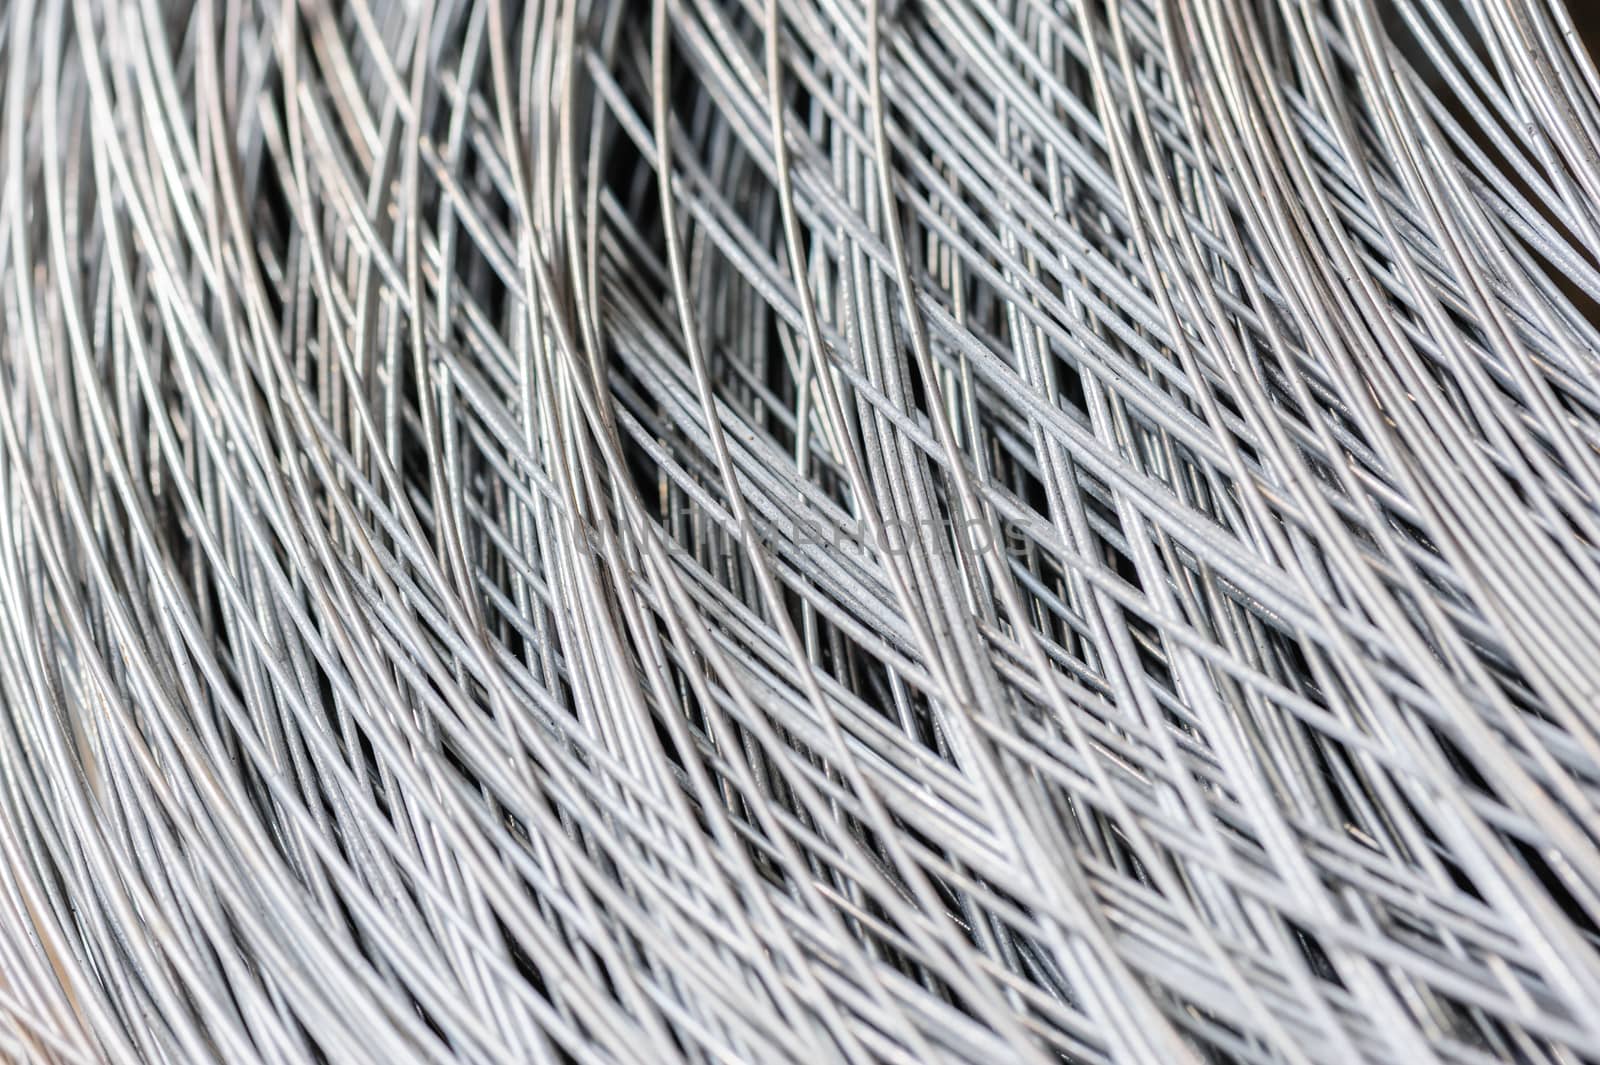 hank of metal wire, selective focus, usable as background